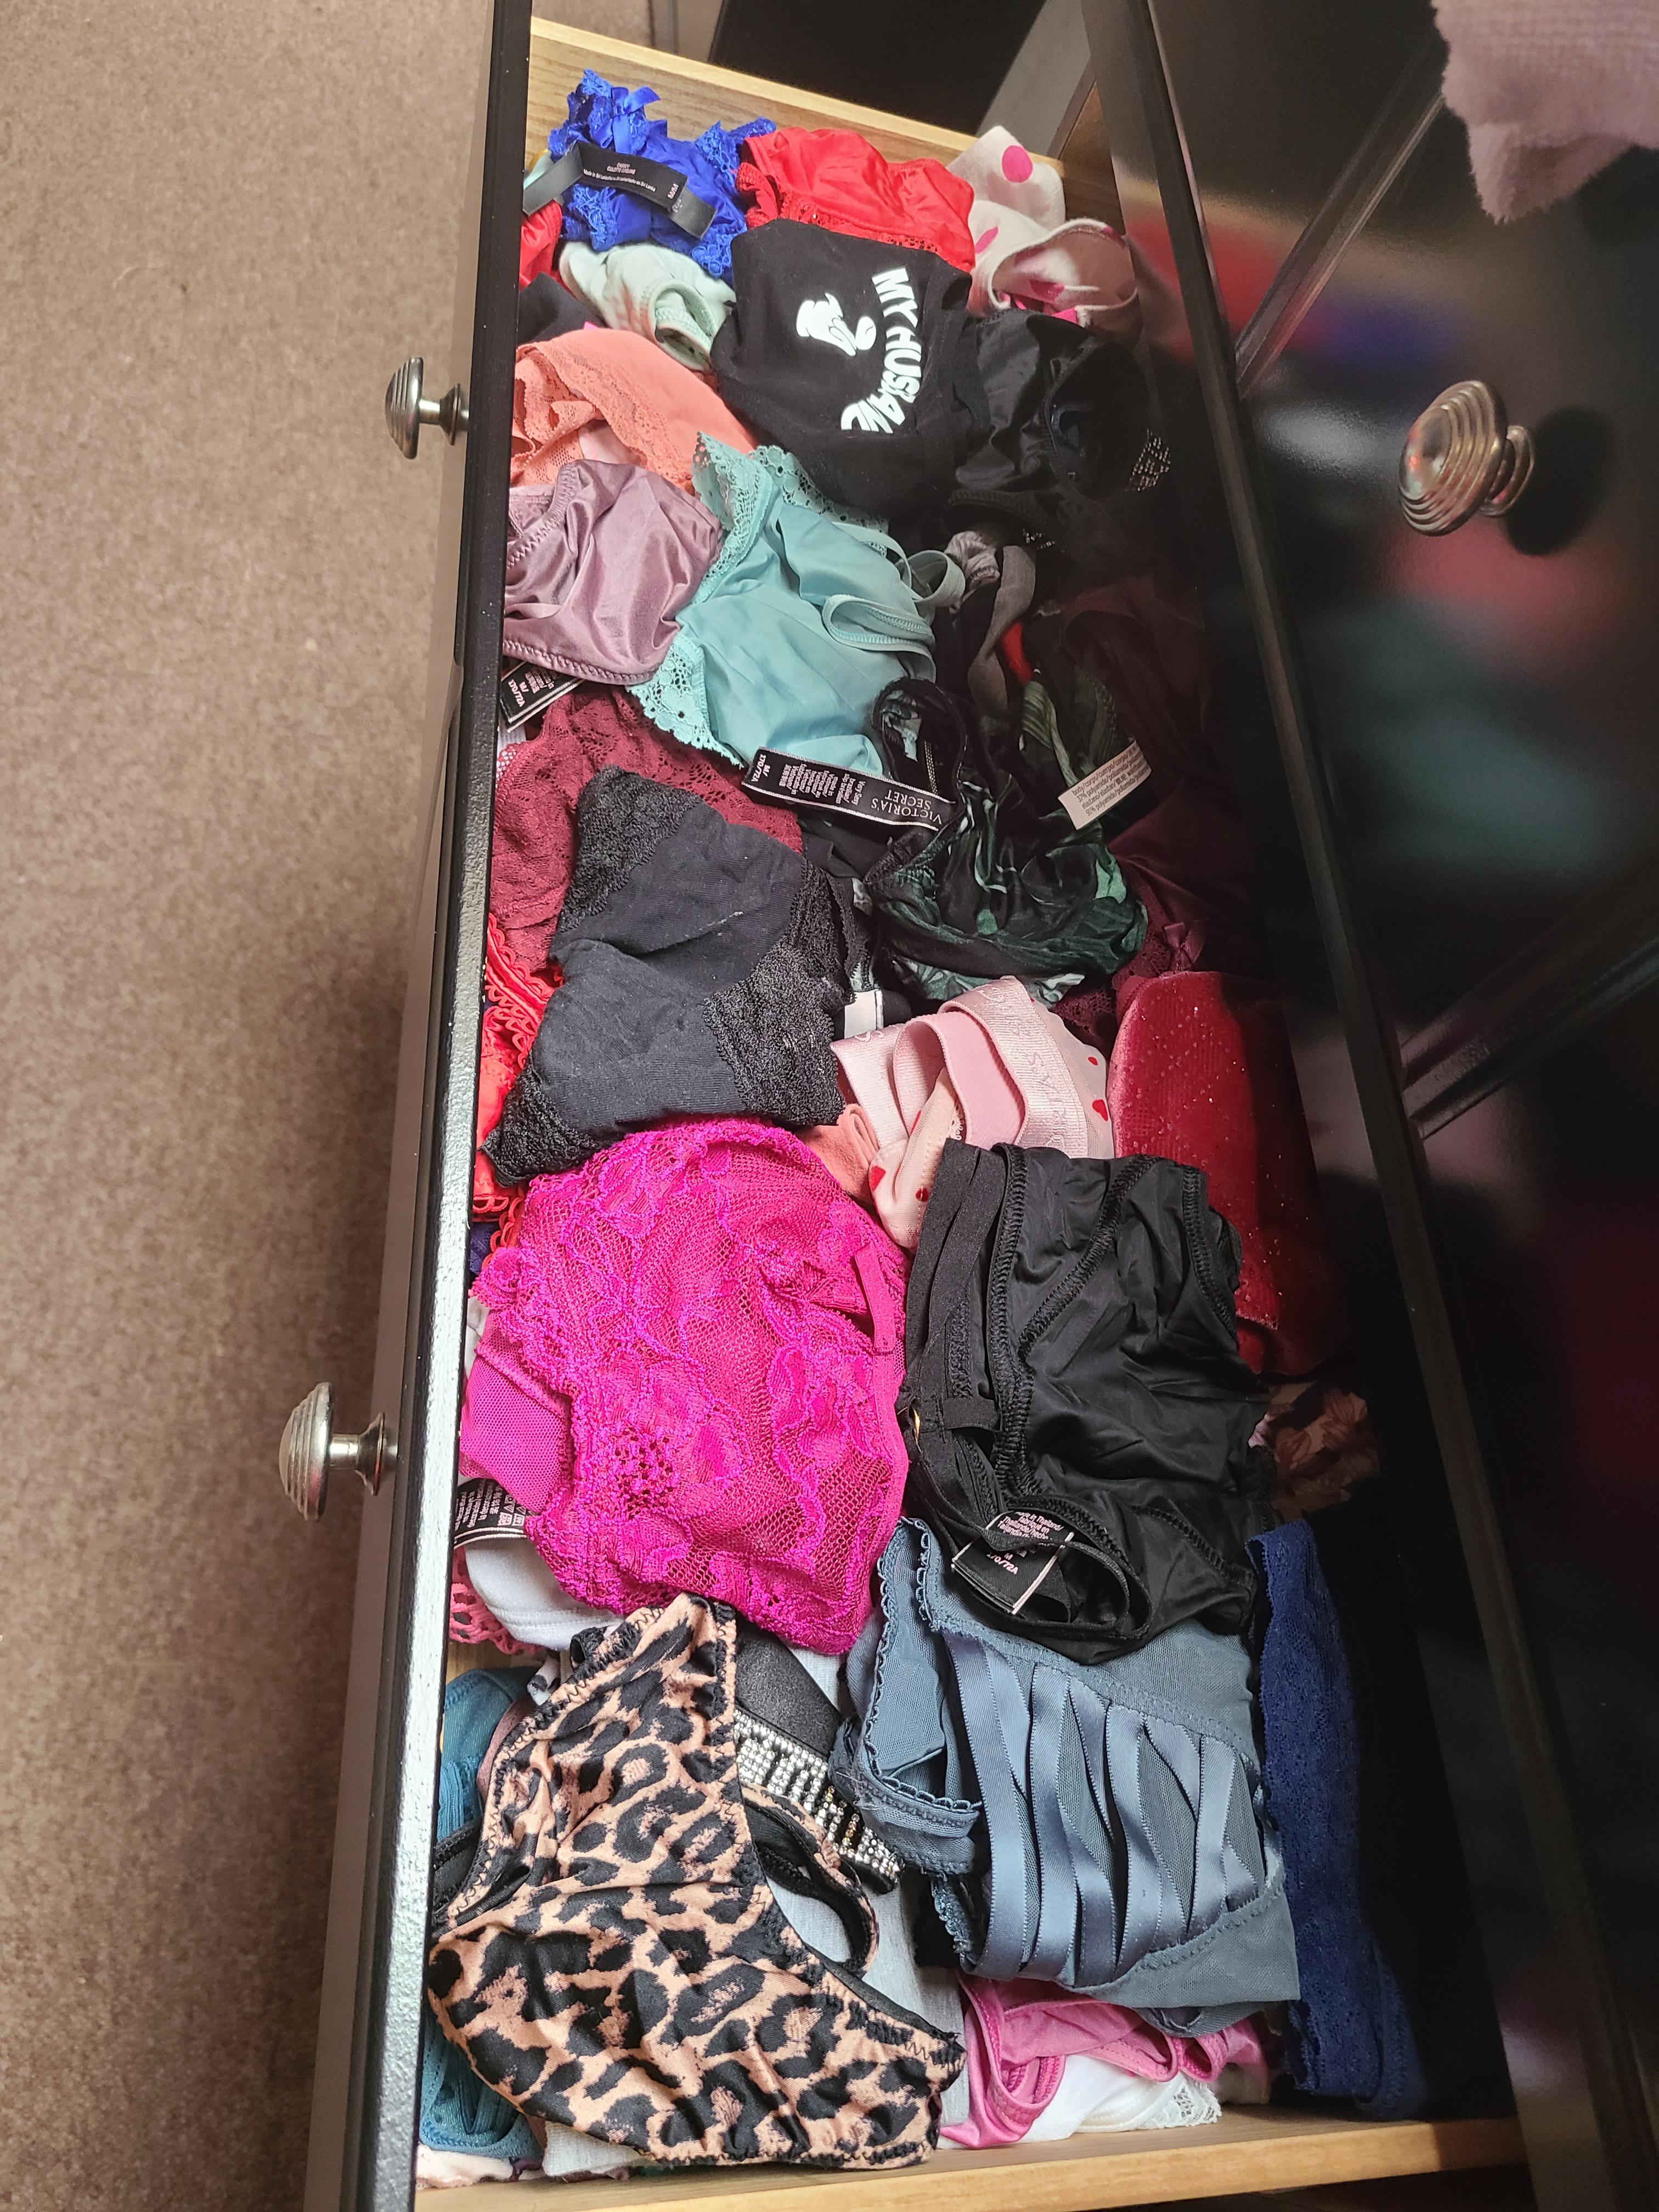 Heres Another Pic Of My Wifes Panty Drawer After Finishing Laundry I Hope Everyone Enjoys 😉 